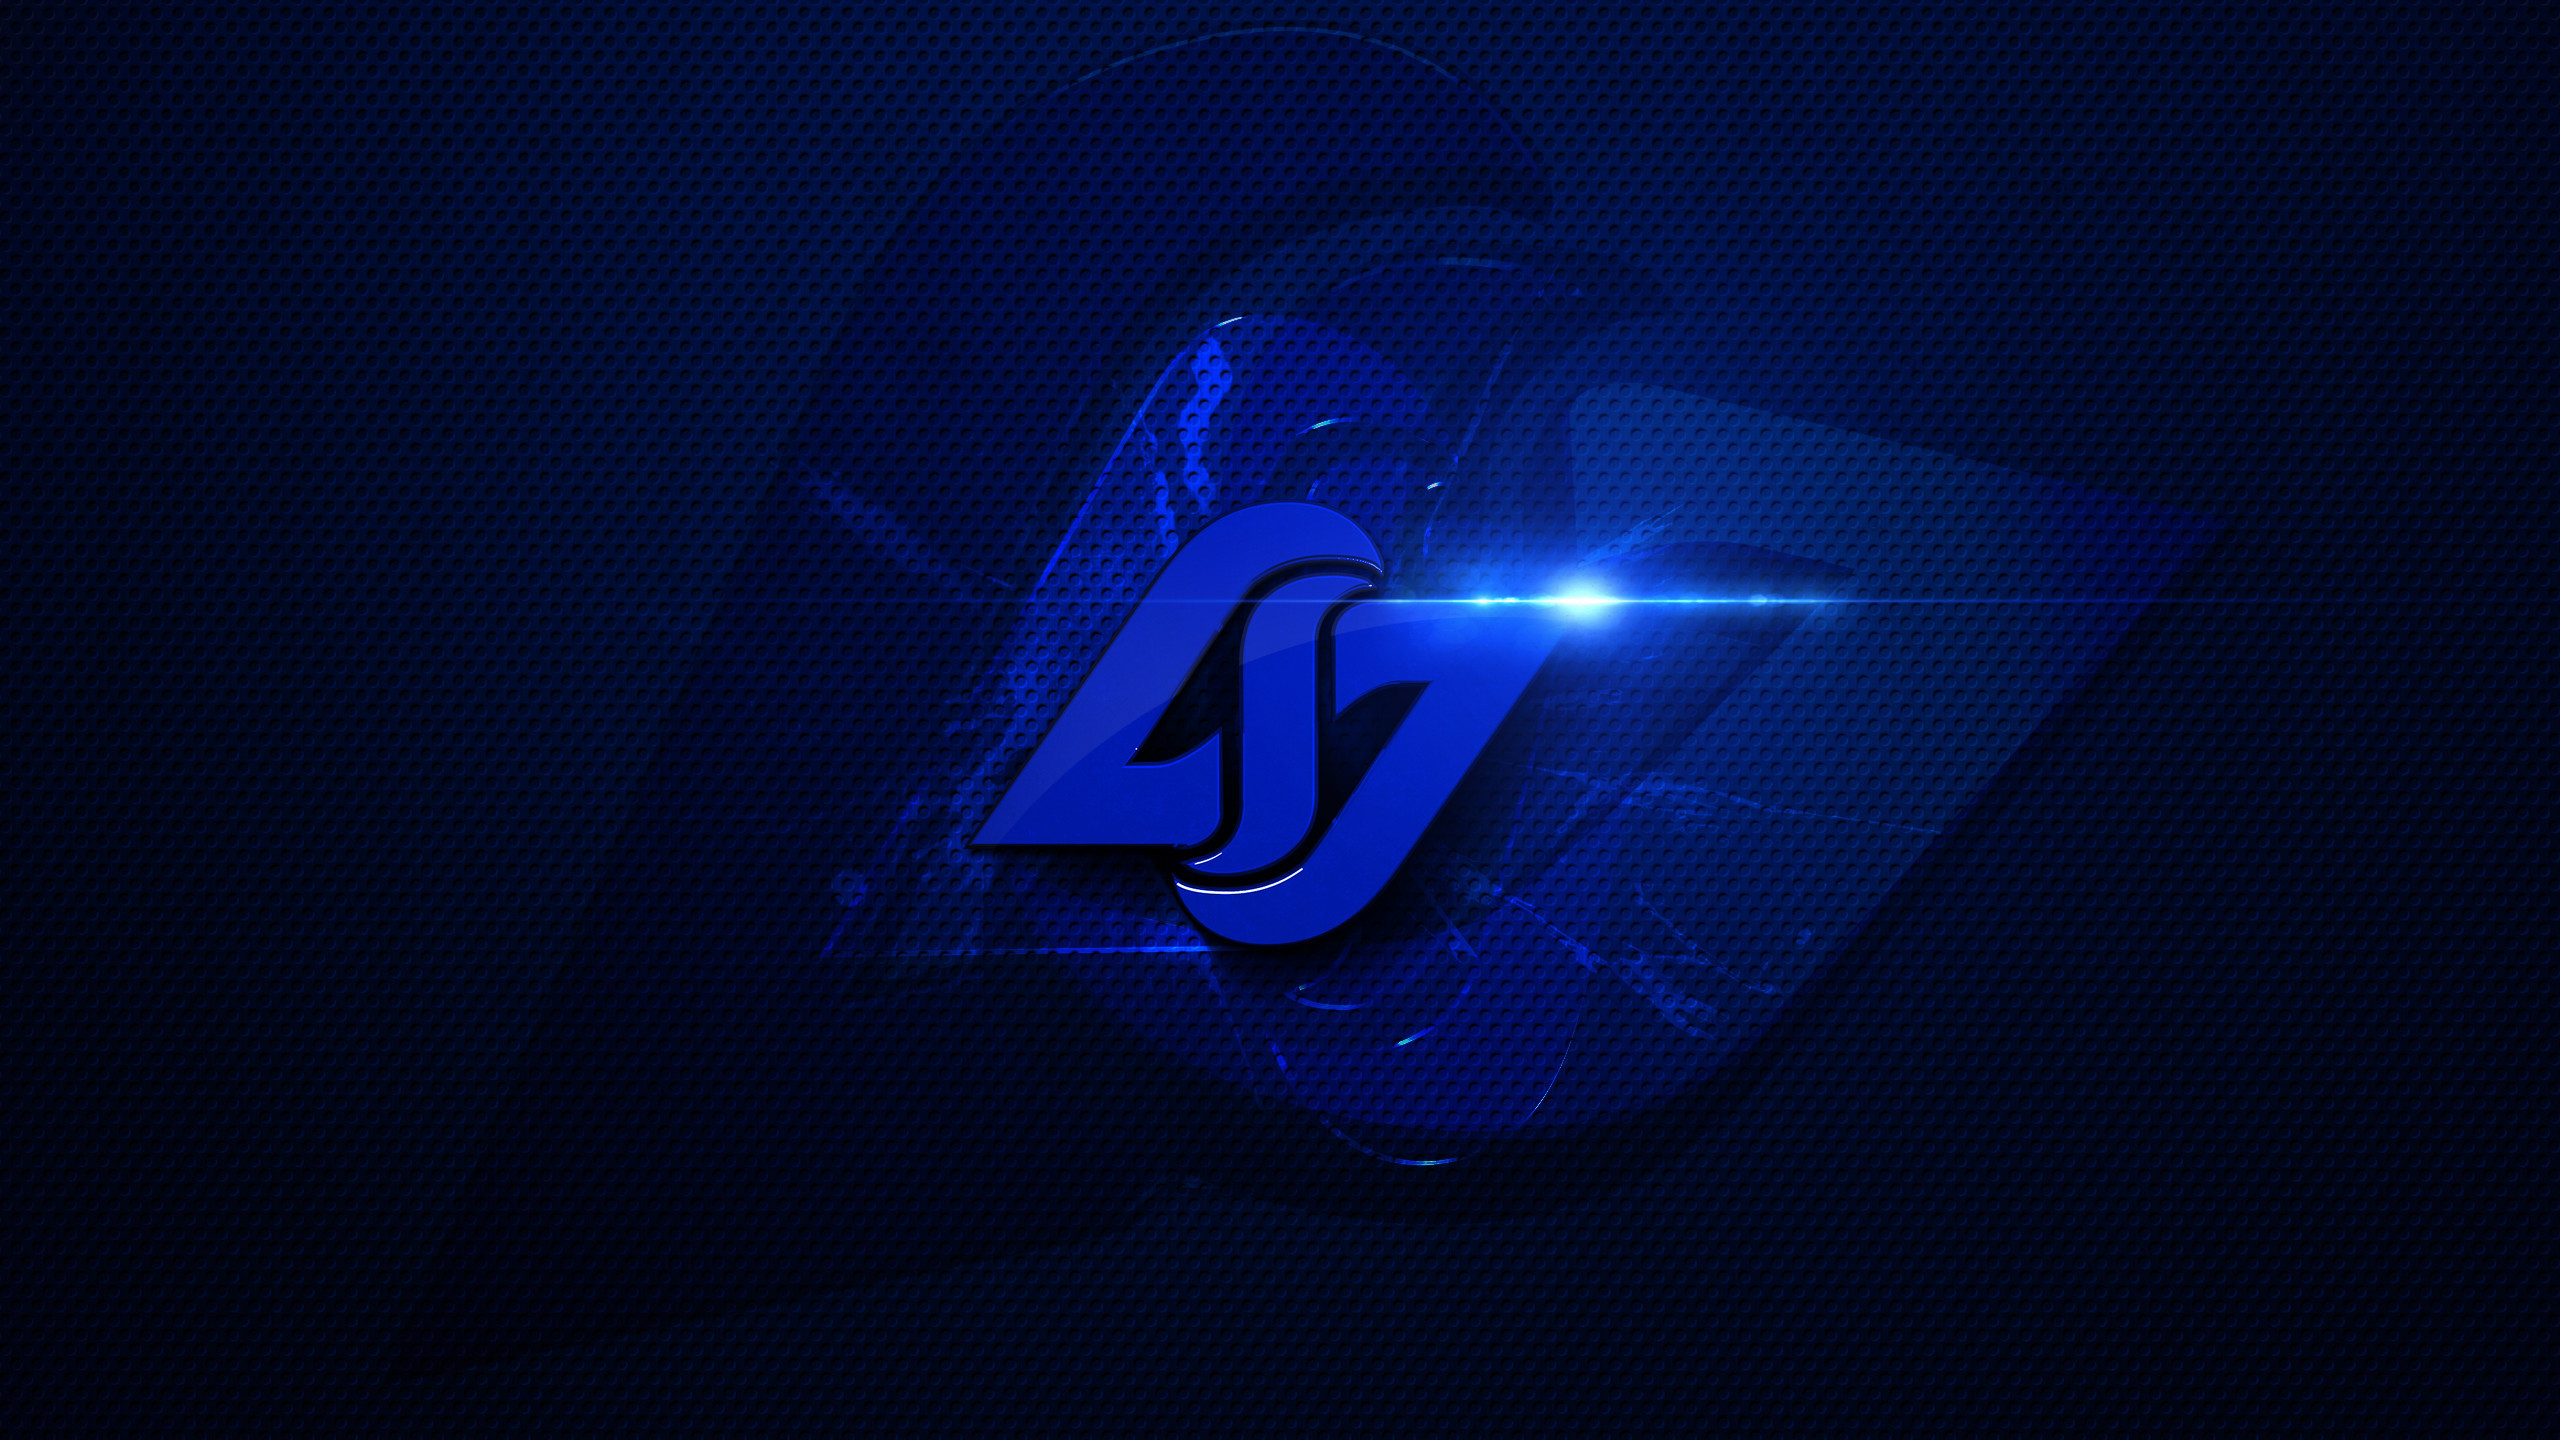 2560x1440 Wallpapers for CLG! :D For more wallpapers and updates:  https://www.facebook.com/Extraqt https://twitter.com/theExtraqt